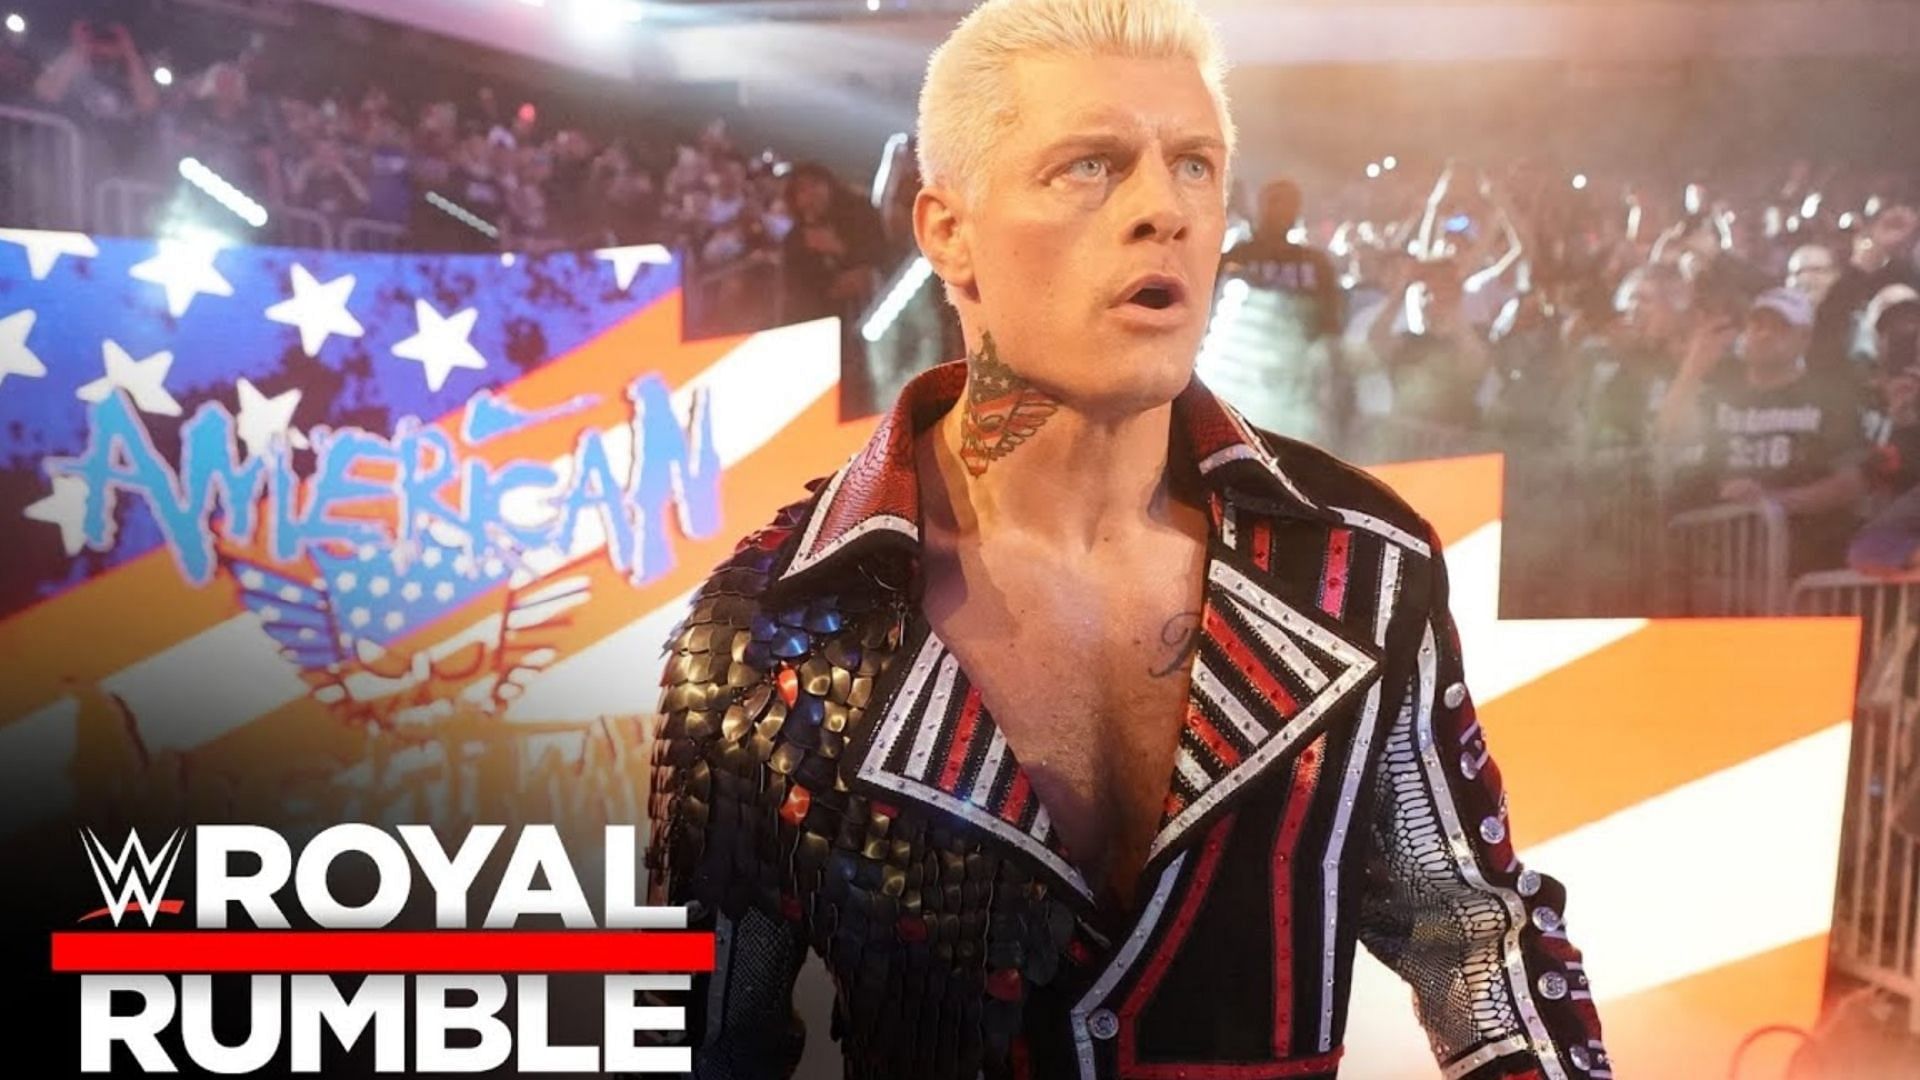 WWE Hall of Famer tells Cody Rhodes "it's your time" after his Royal Rumble win